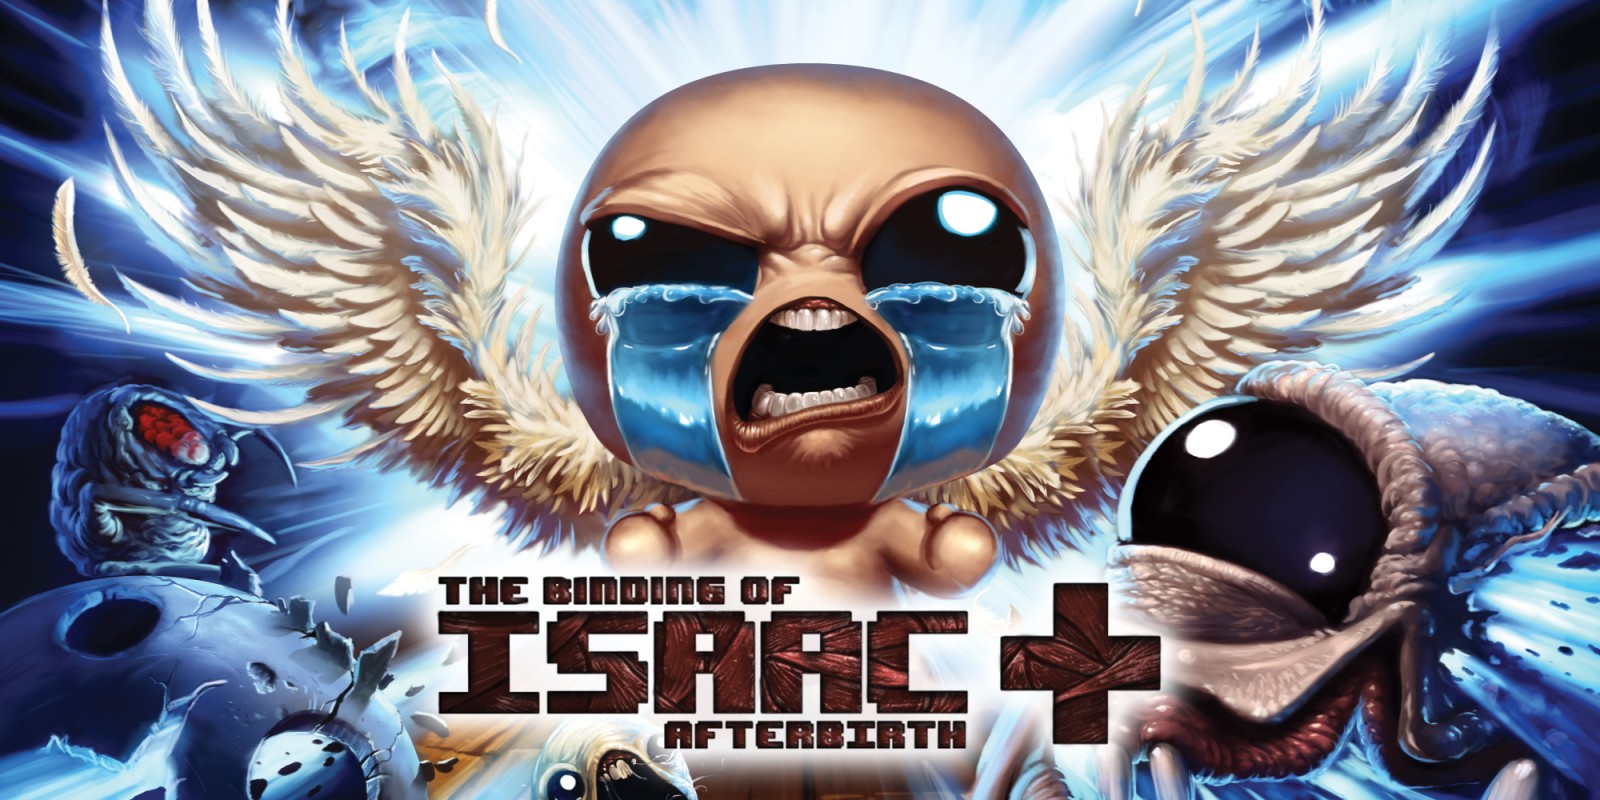 The binding of isaac game free